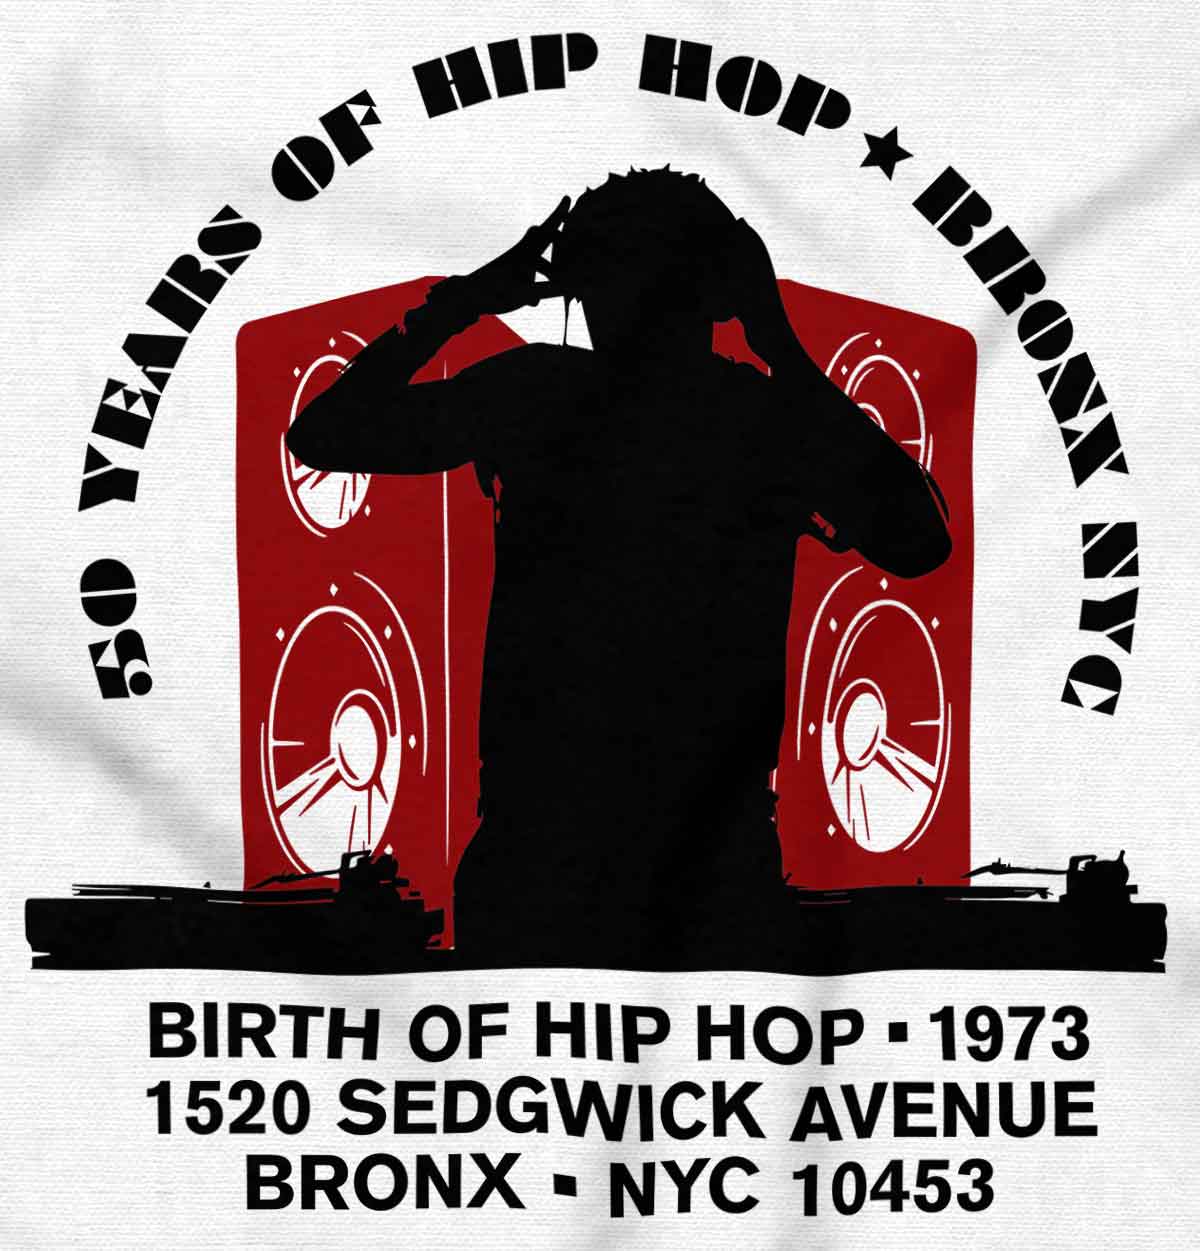 This image honors the birthplace of hip-hop and showcases its history, beats, and rhymes, representing the heart and soul of the culture showing a DJ and big speakers.